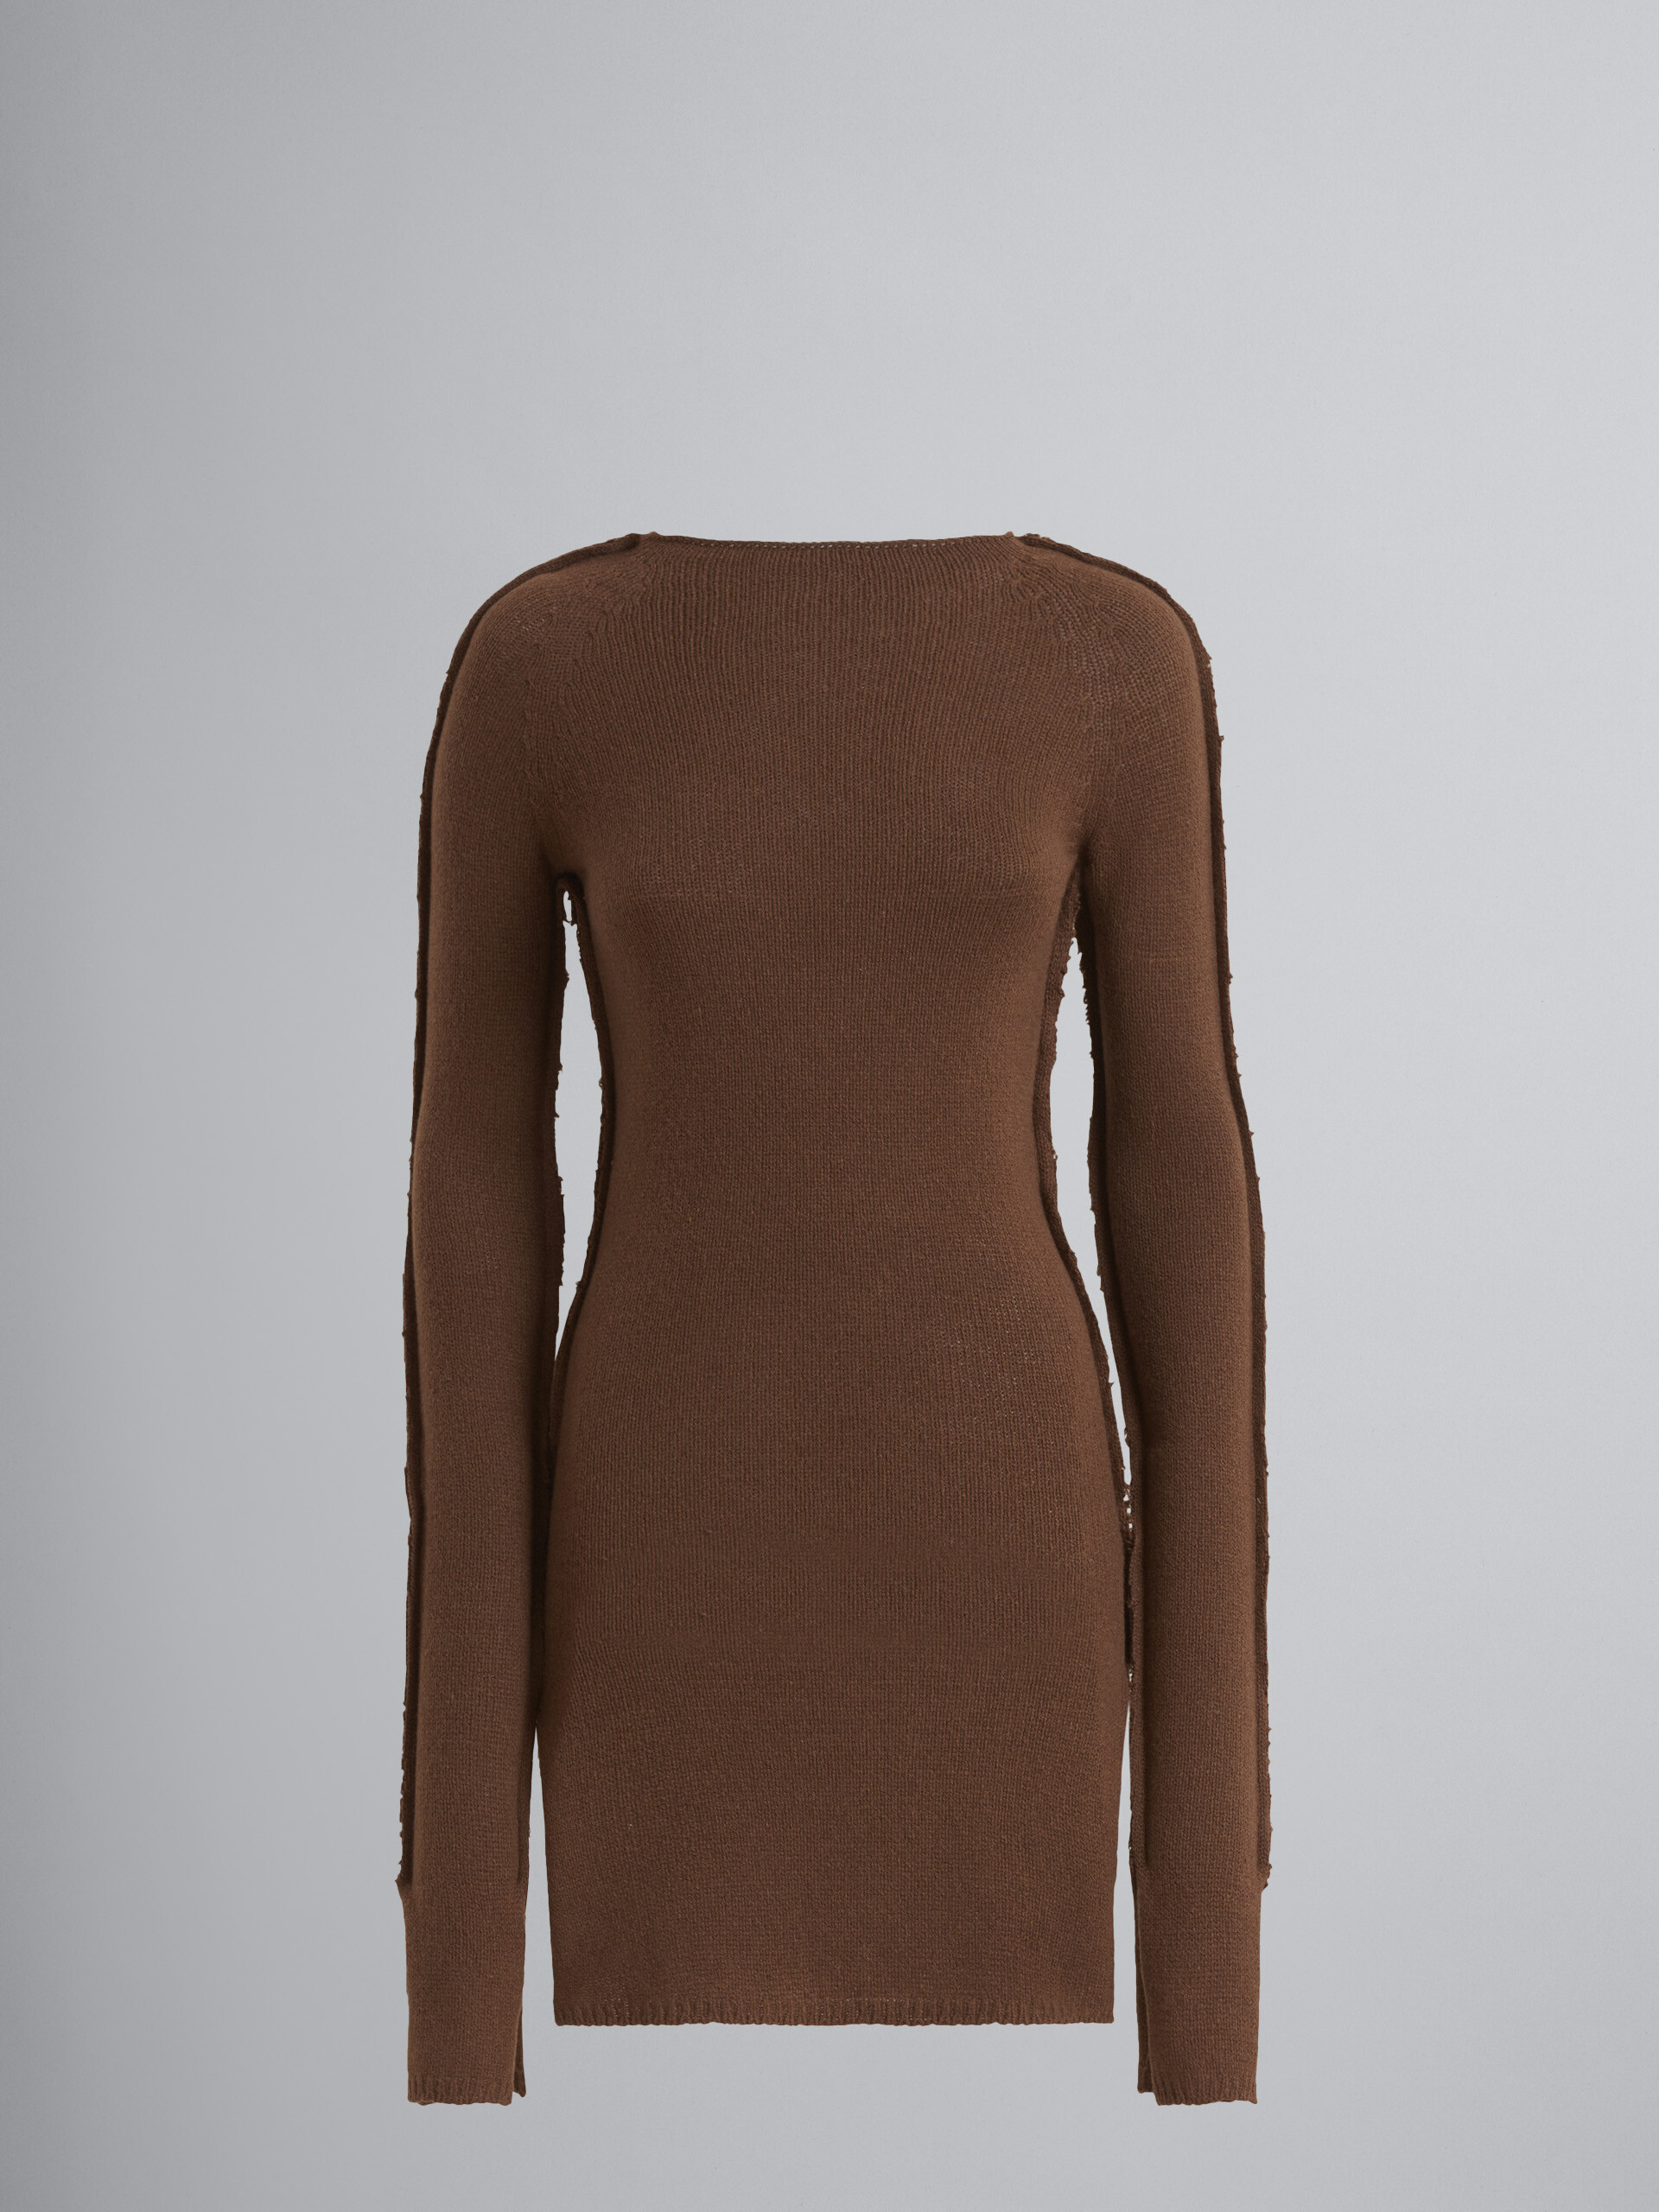 Recycled cashmere sweater with side slits and cuffs - Pullovers - Image 1